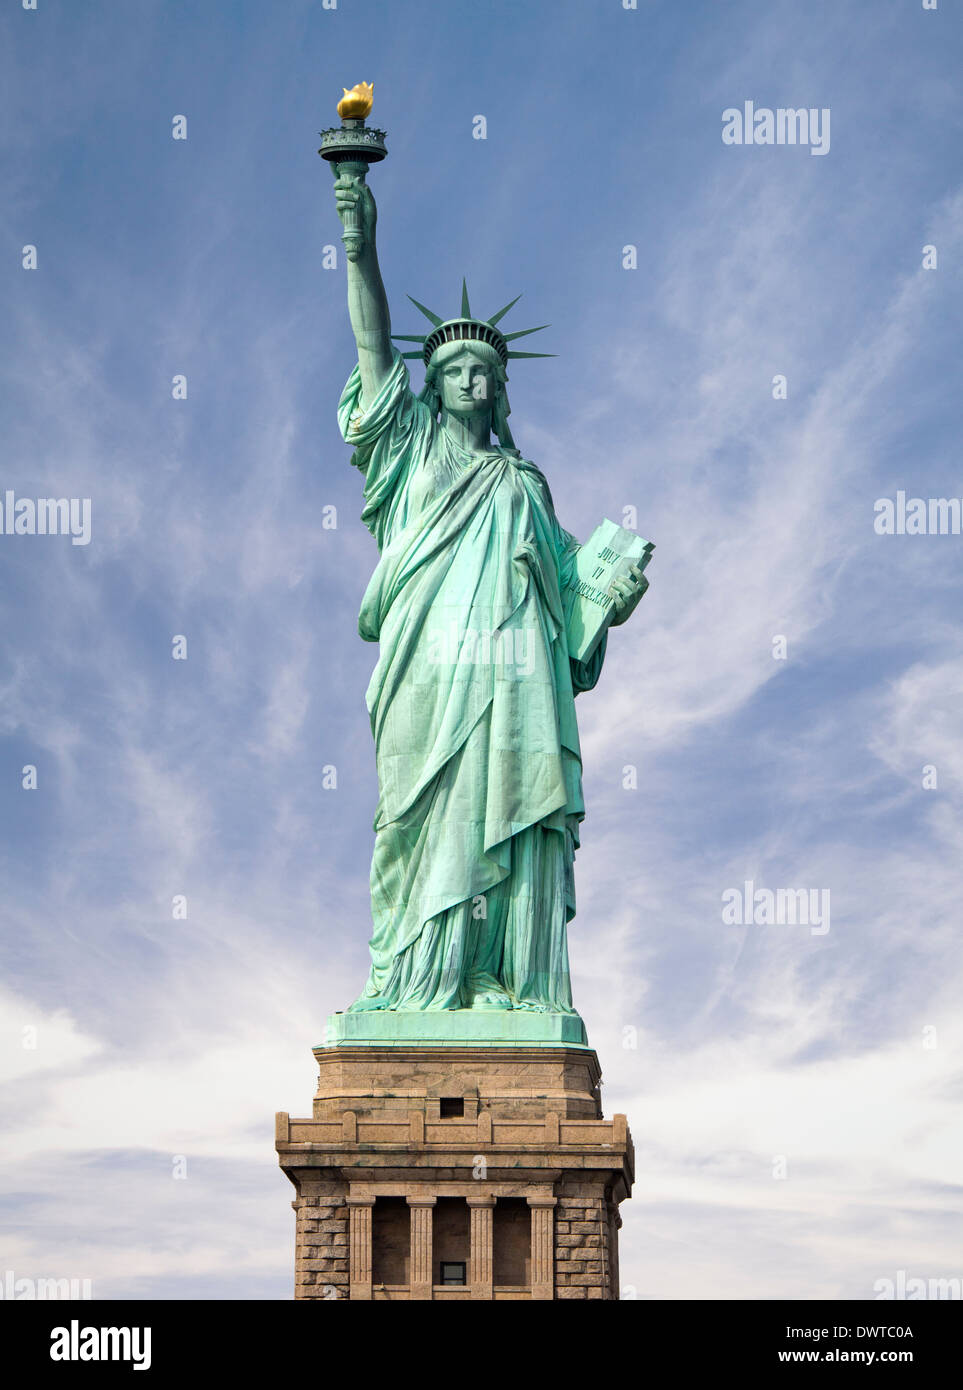 The iconic Statue of Liberty in New York USA 2 Stock Photo